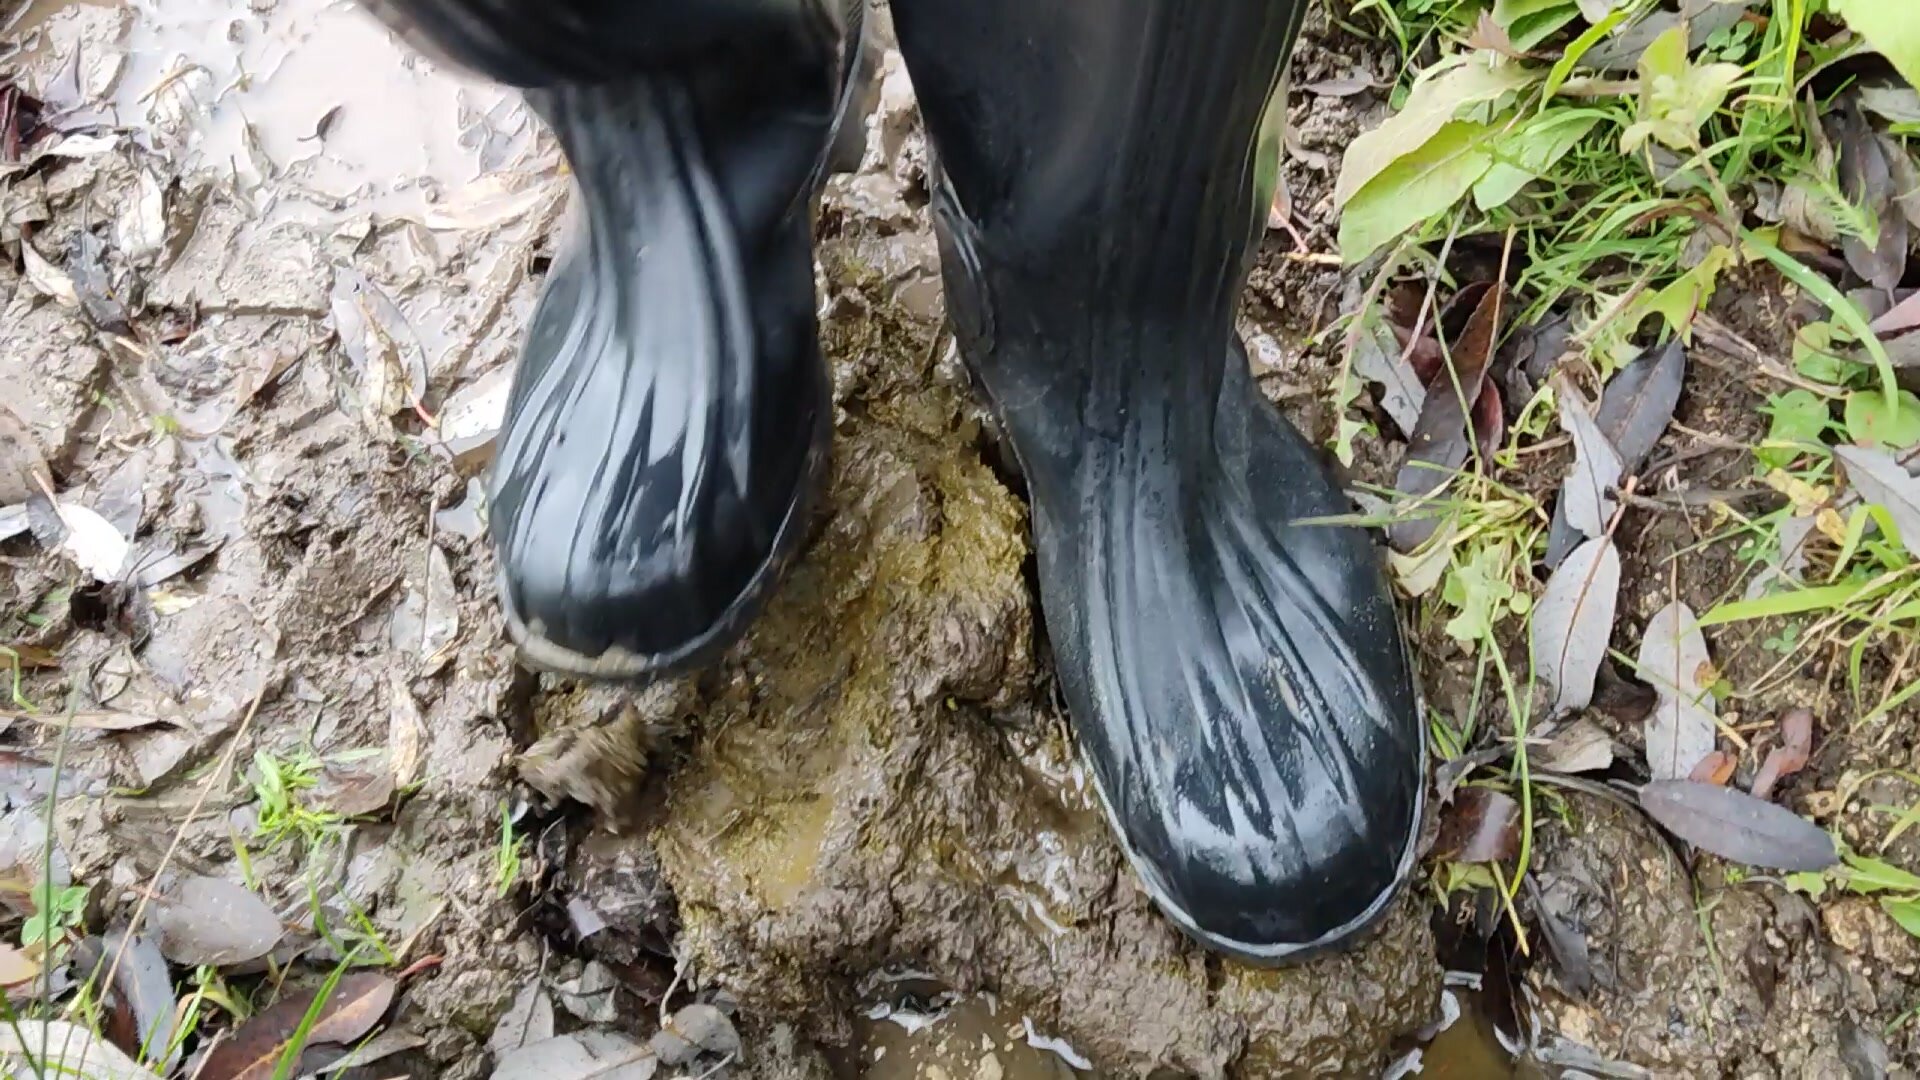 Rubber boots - video 7